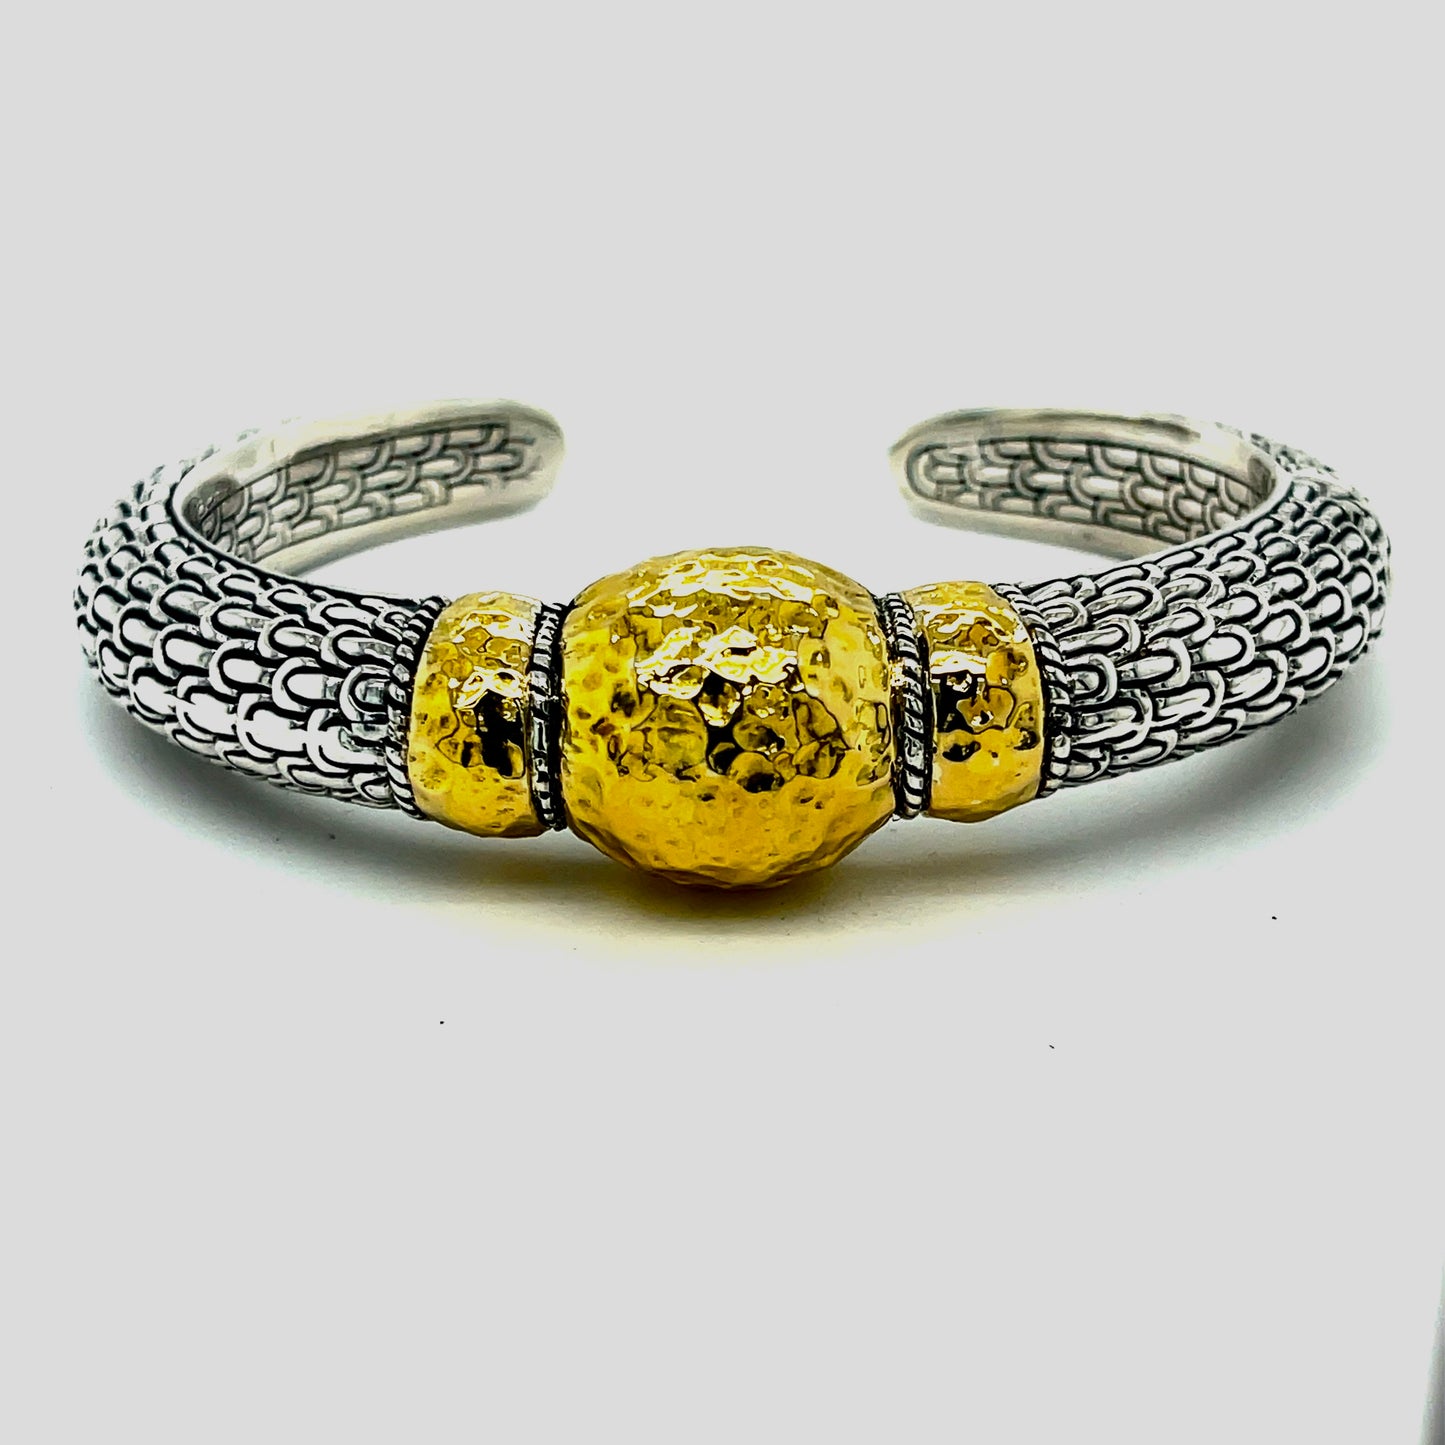 18kt Gold and Silver cuff bracelet